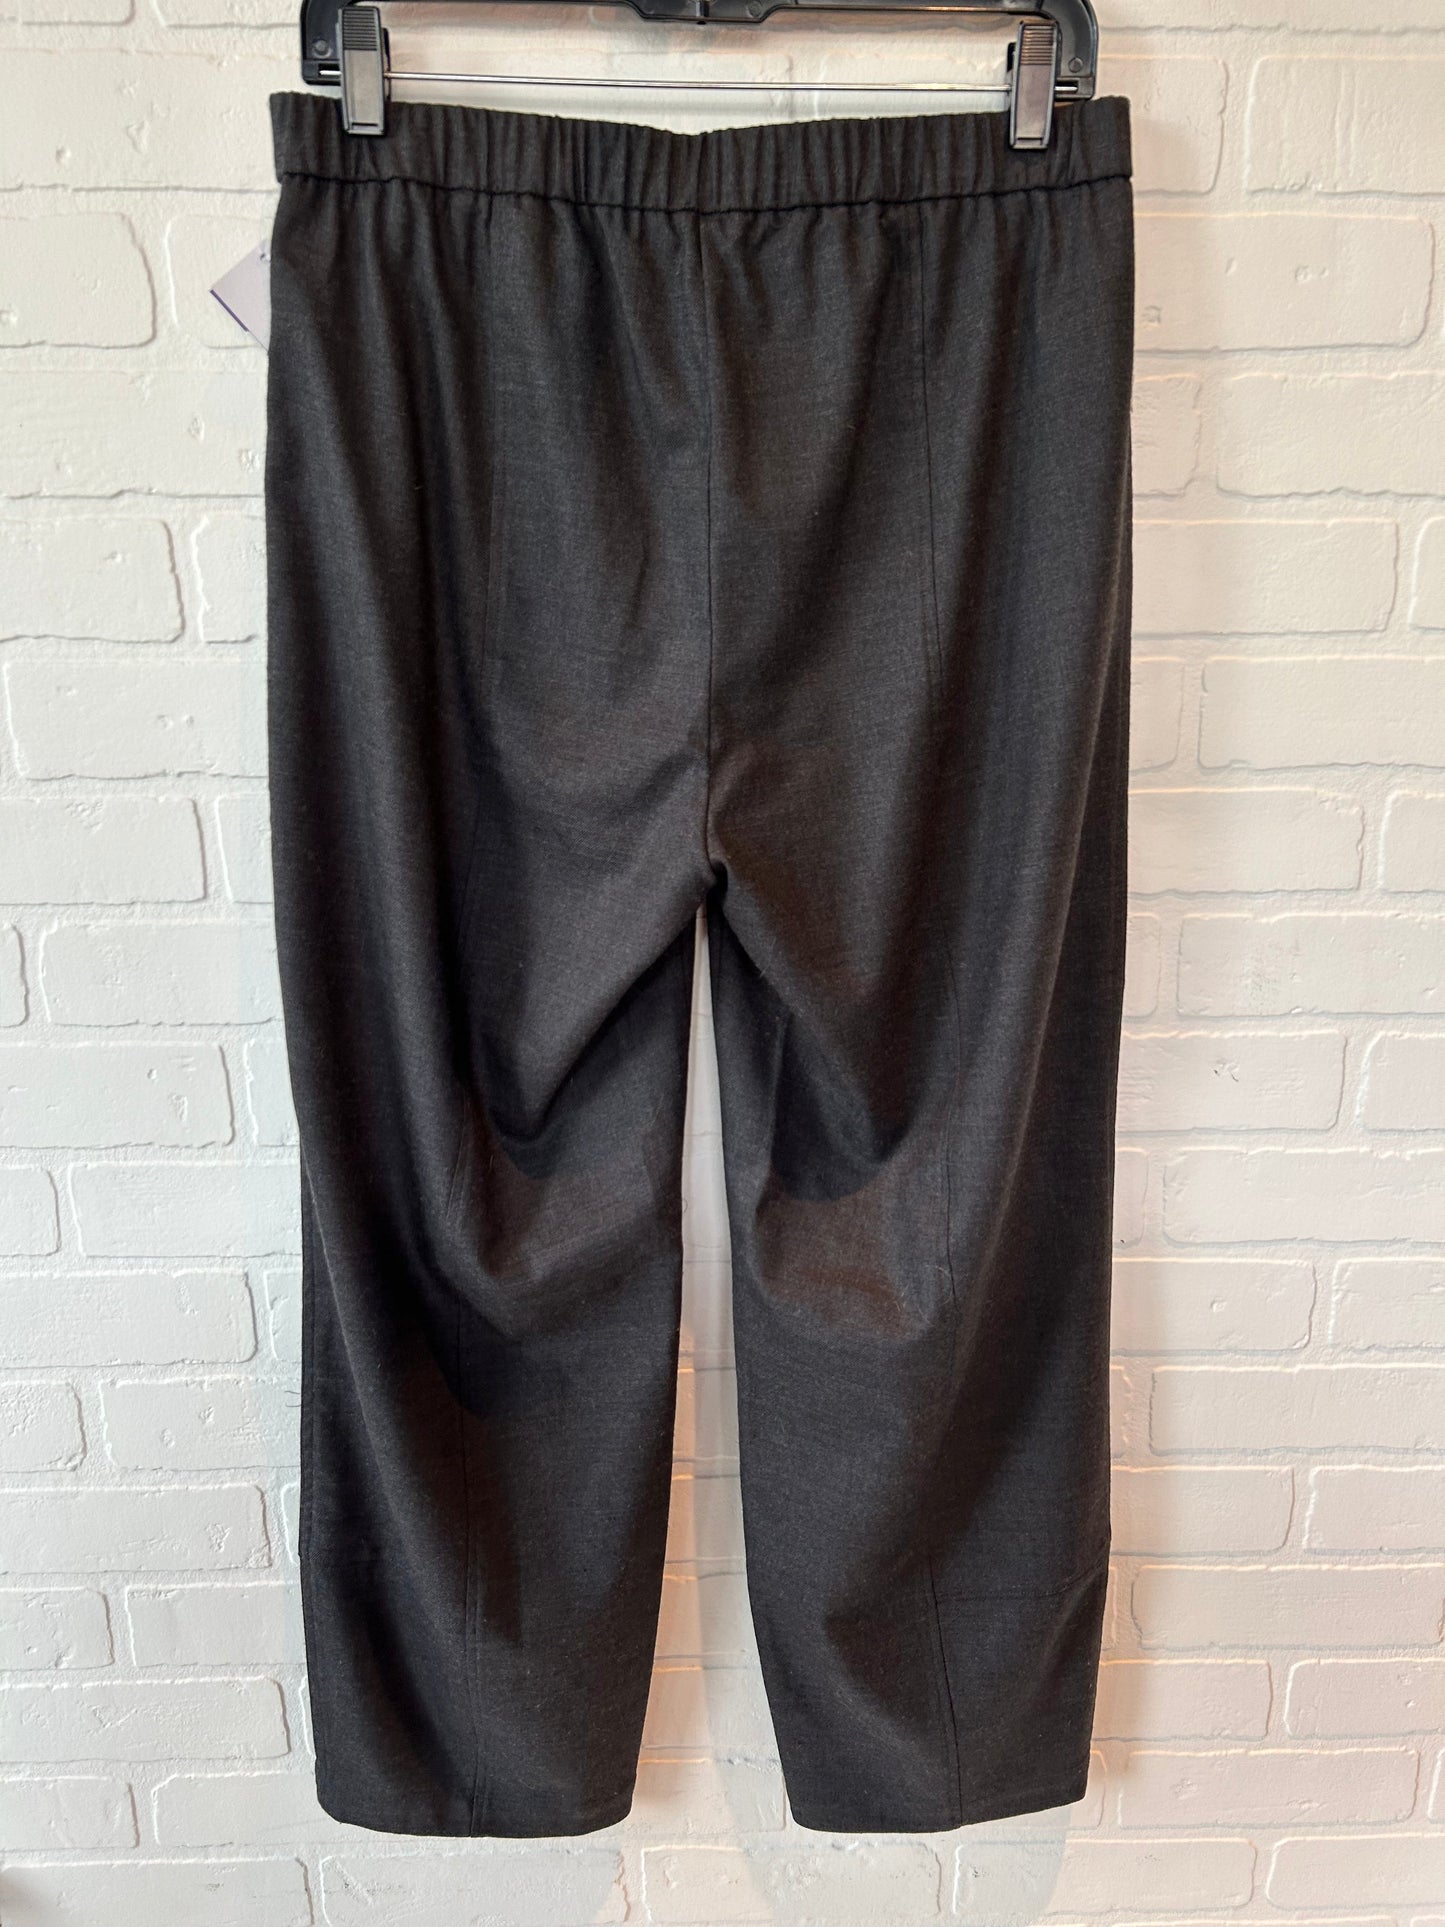 Grey Pants Other Eileen Fisher, Size 4